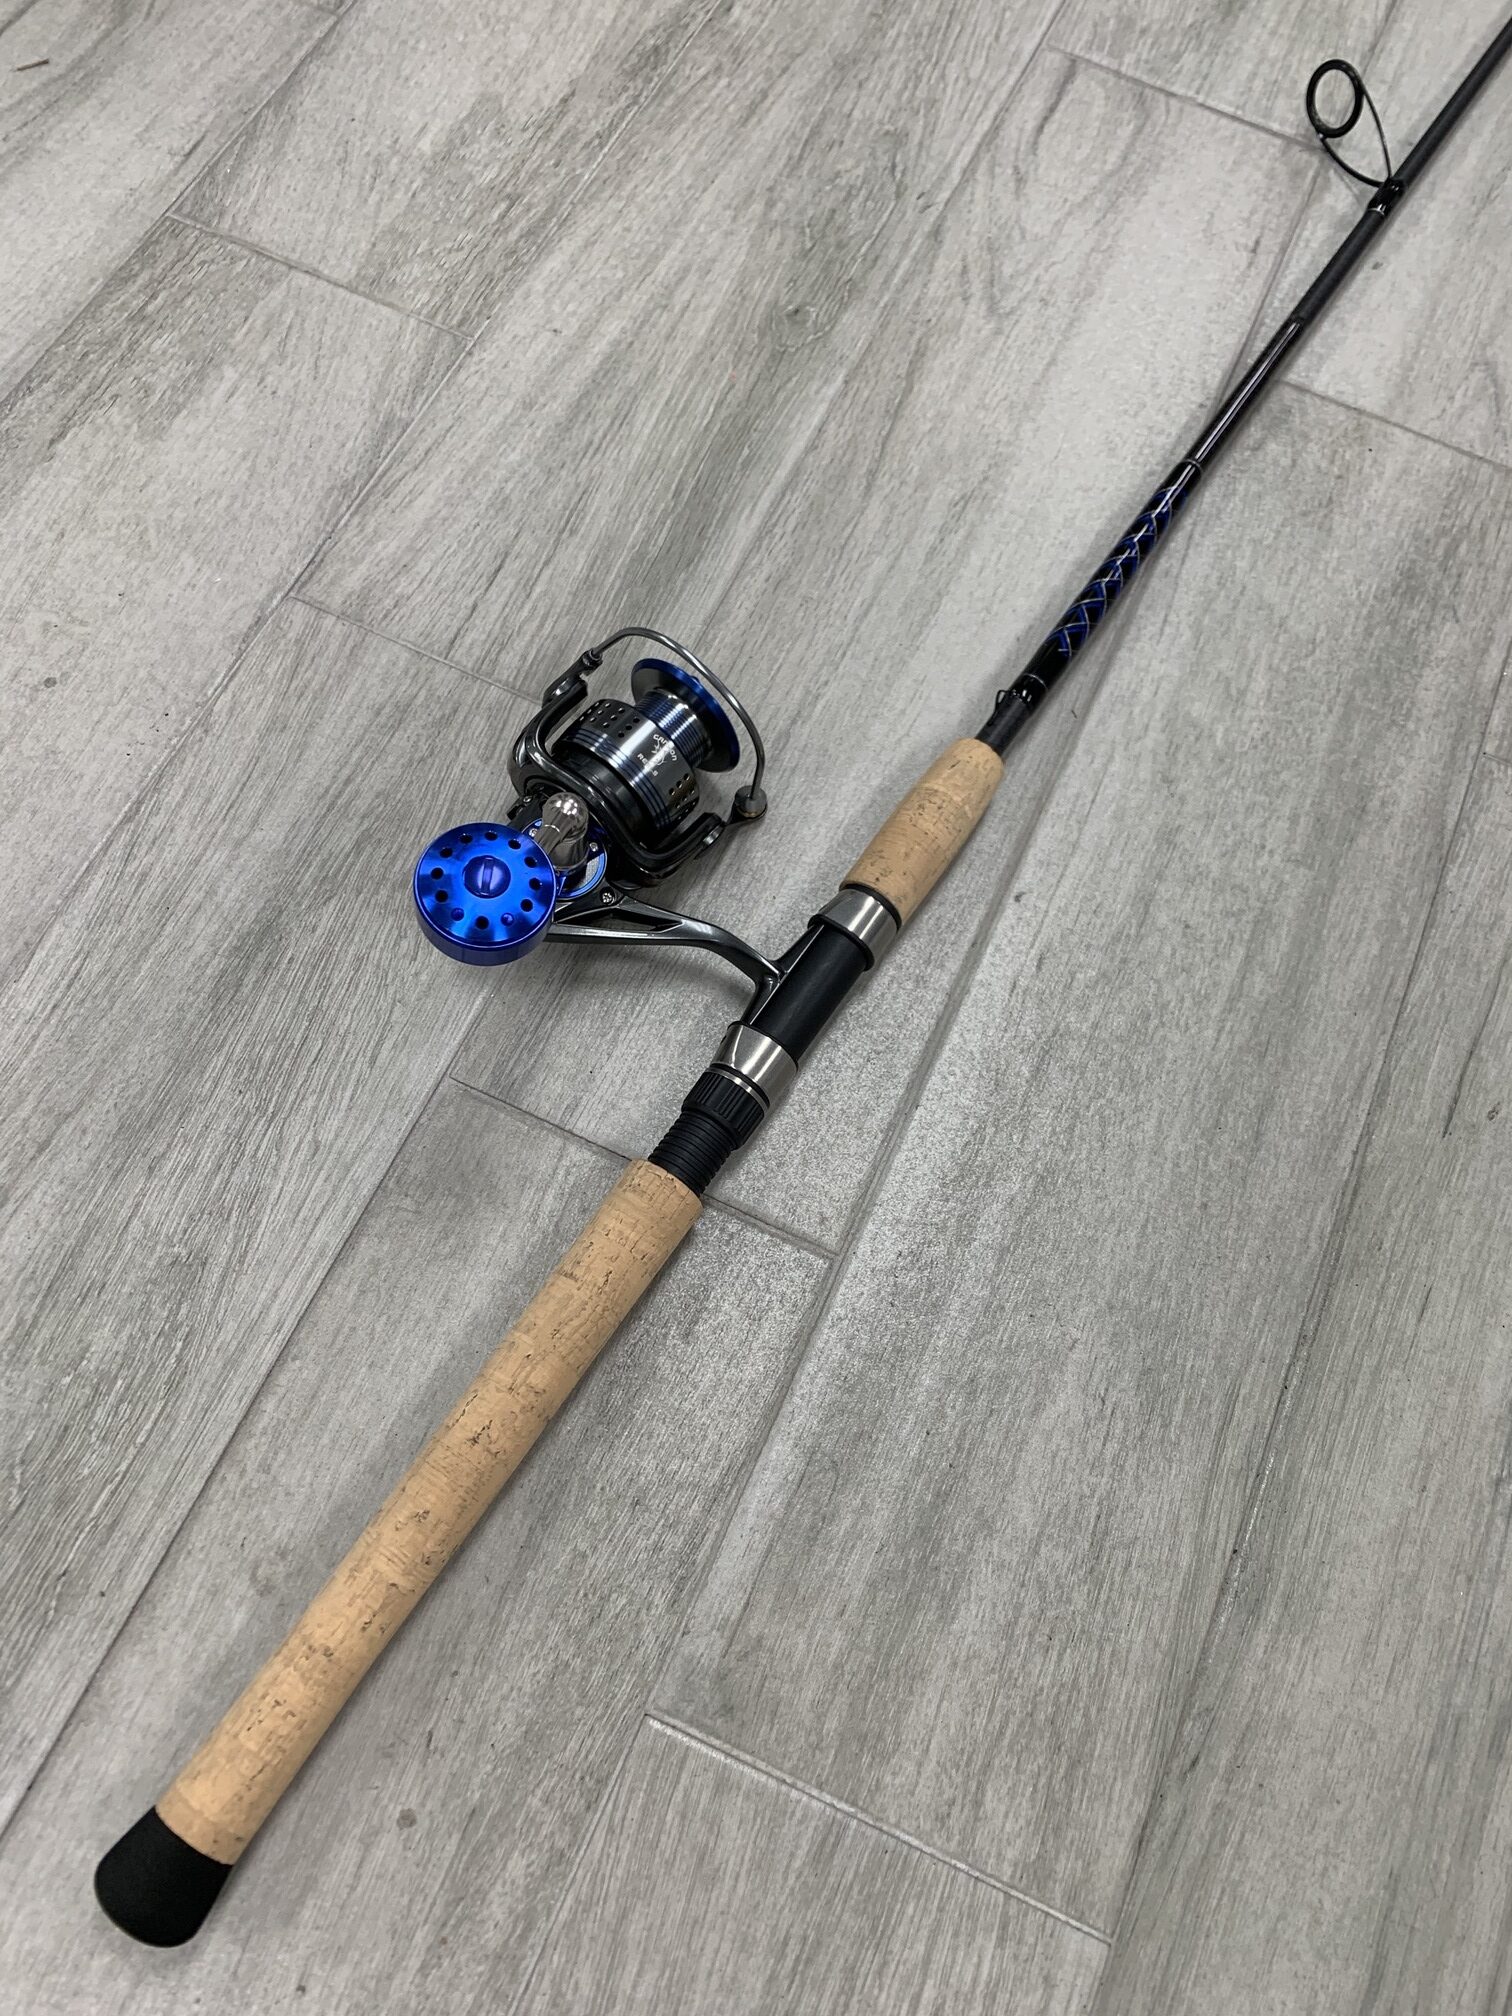 7′ 12-20# Inshore Carbon Fiber Spinning Rod with Canyon 3500